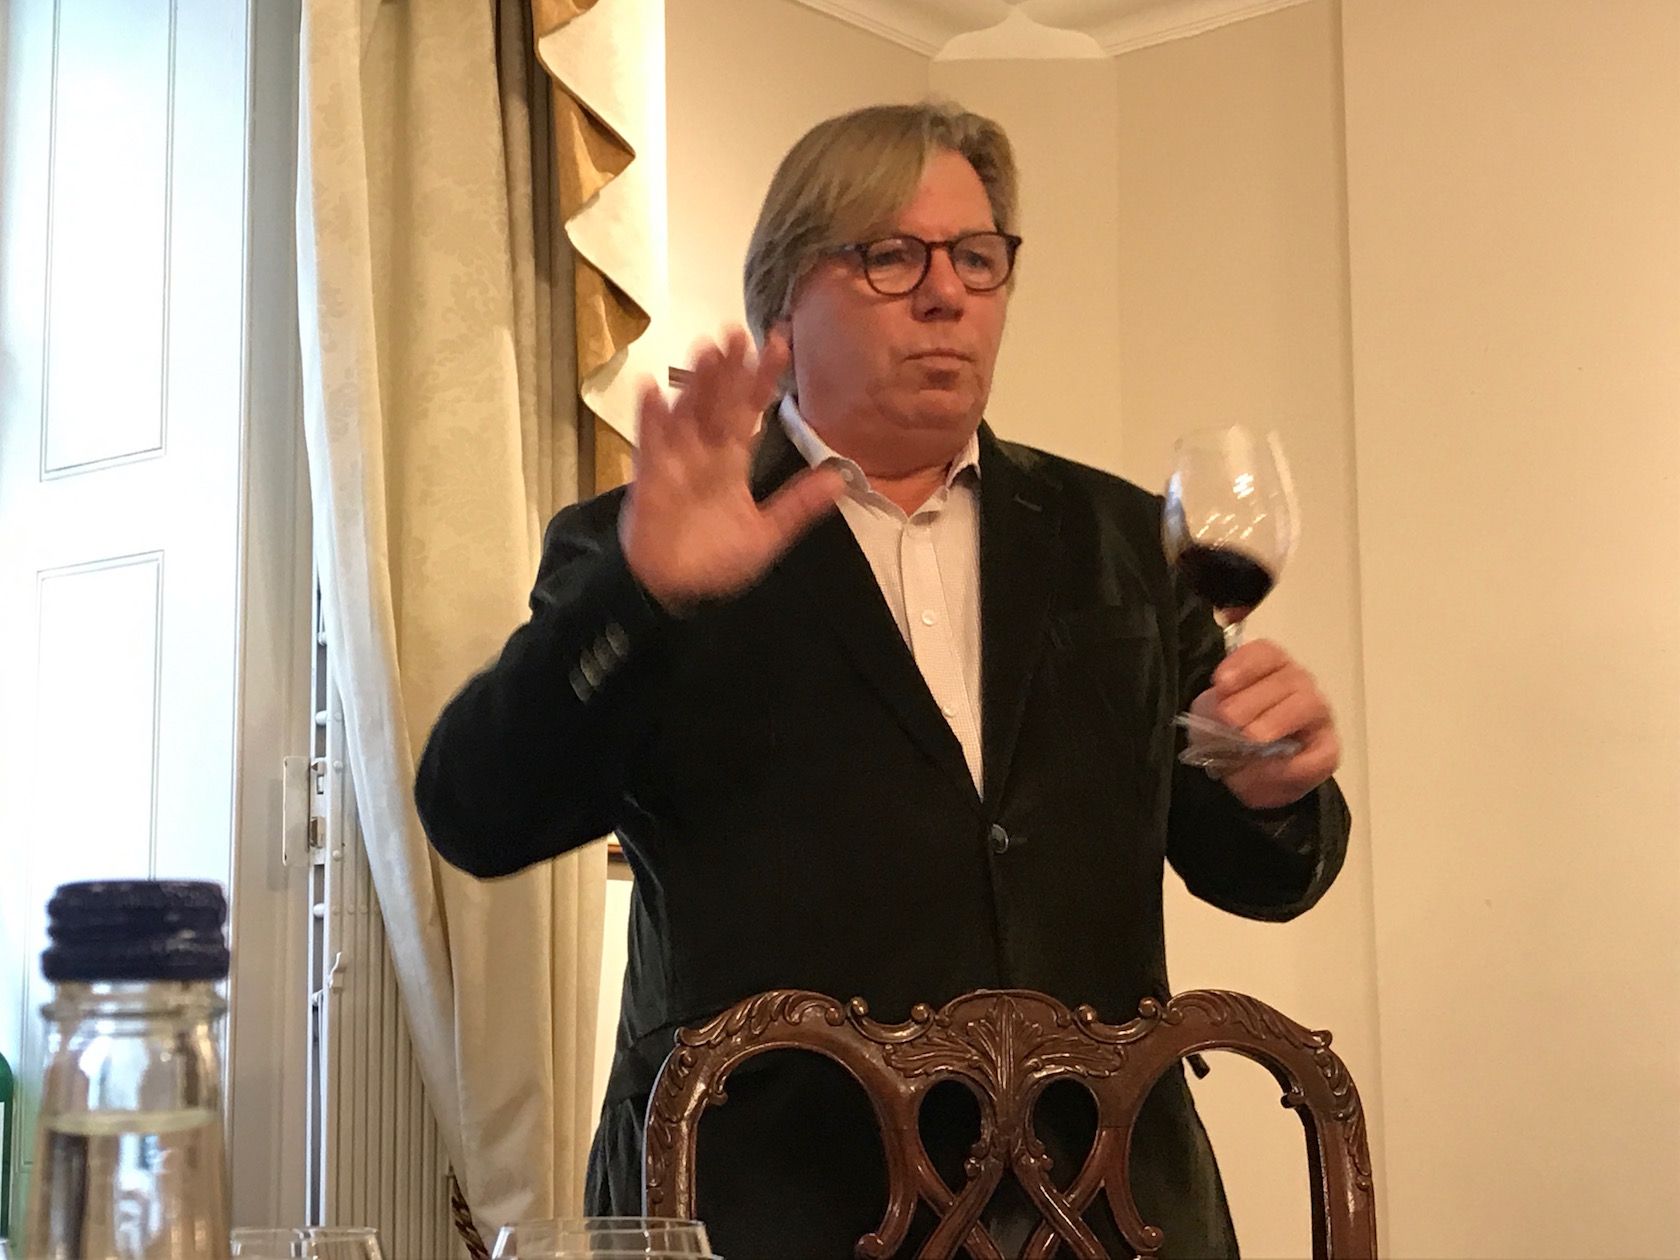 Peter Sisseck: “Coming from Bordeaux is almost a liability”